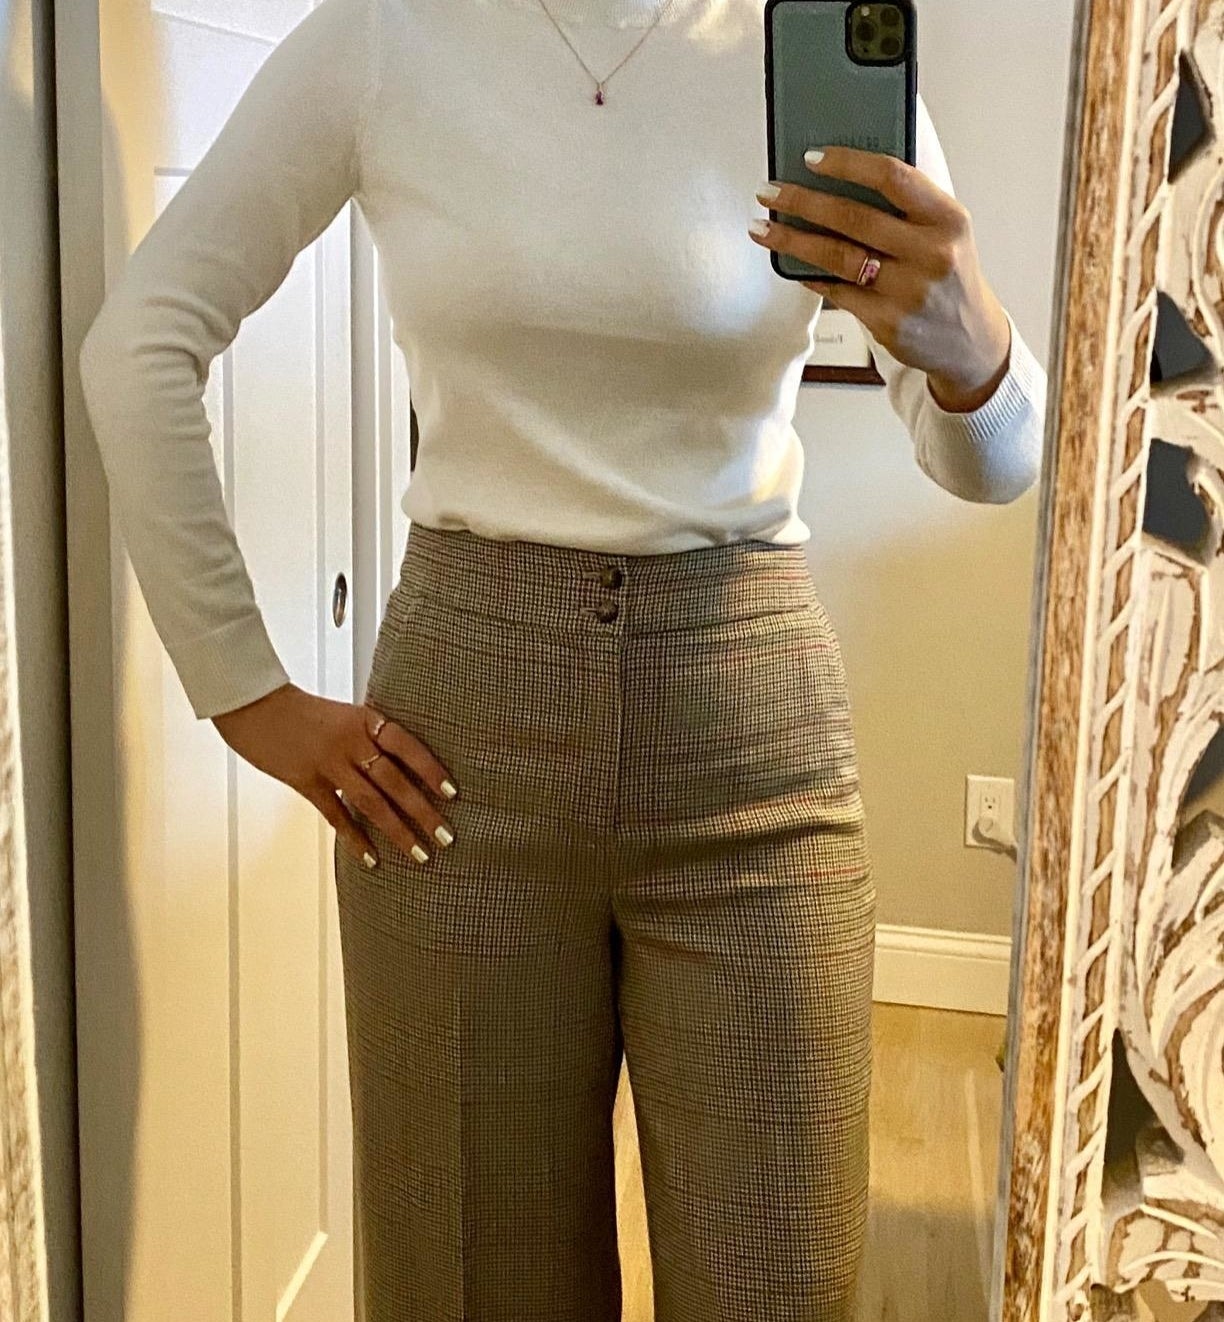 mirror selfie of a reviewer wearing a cream mock neck sweater tucked into brown pants